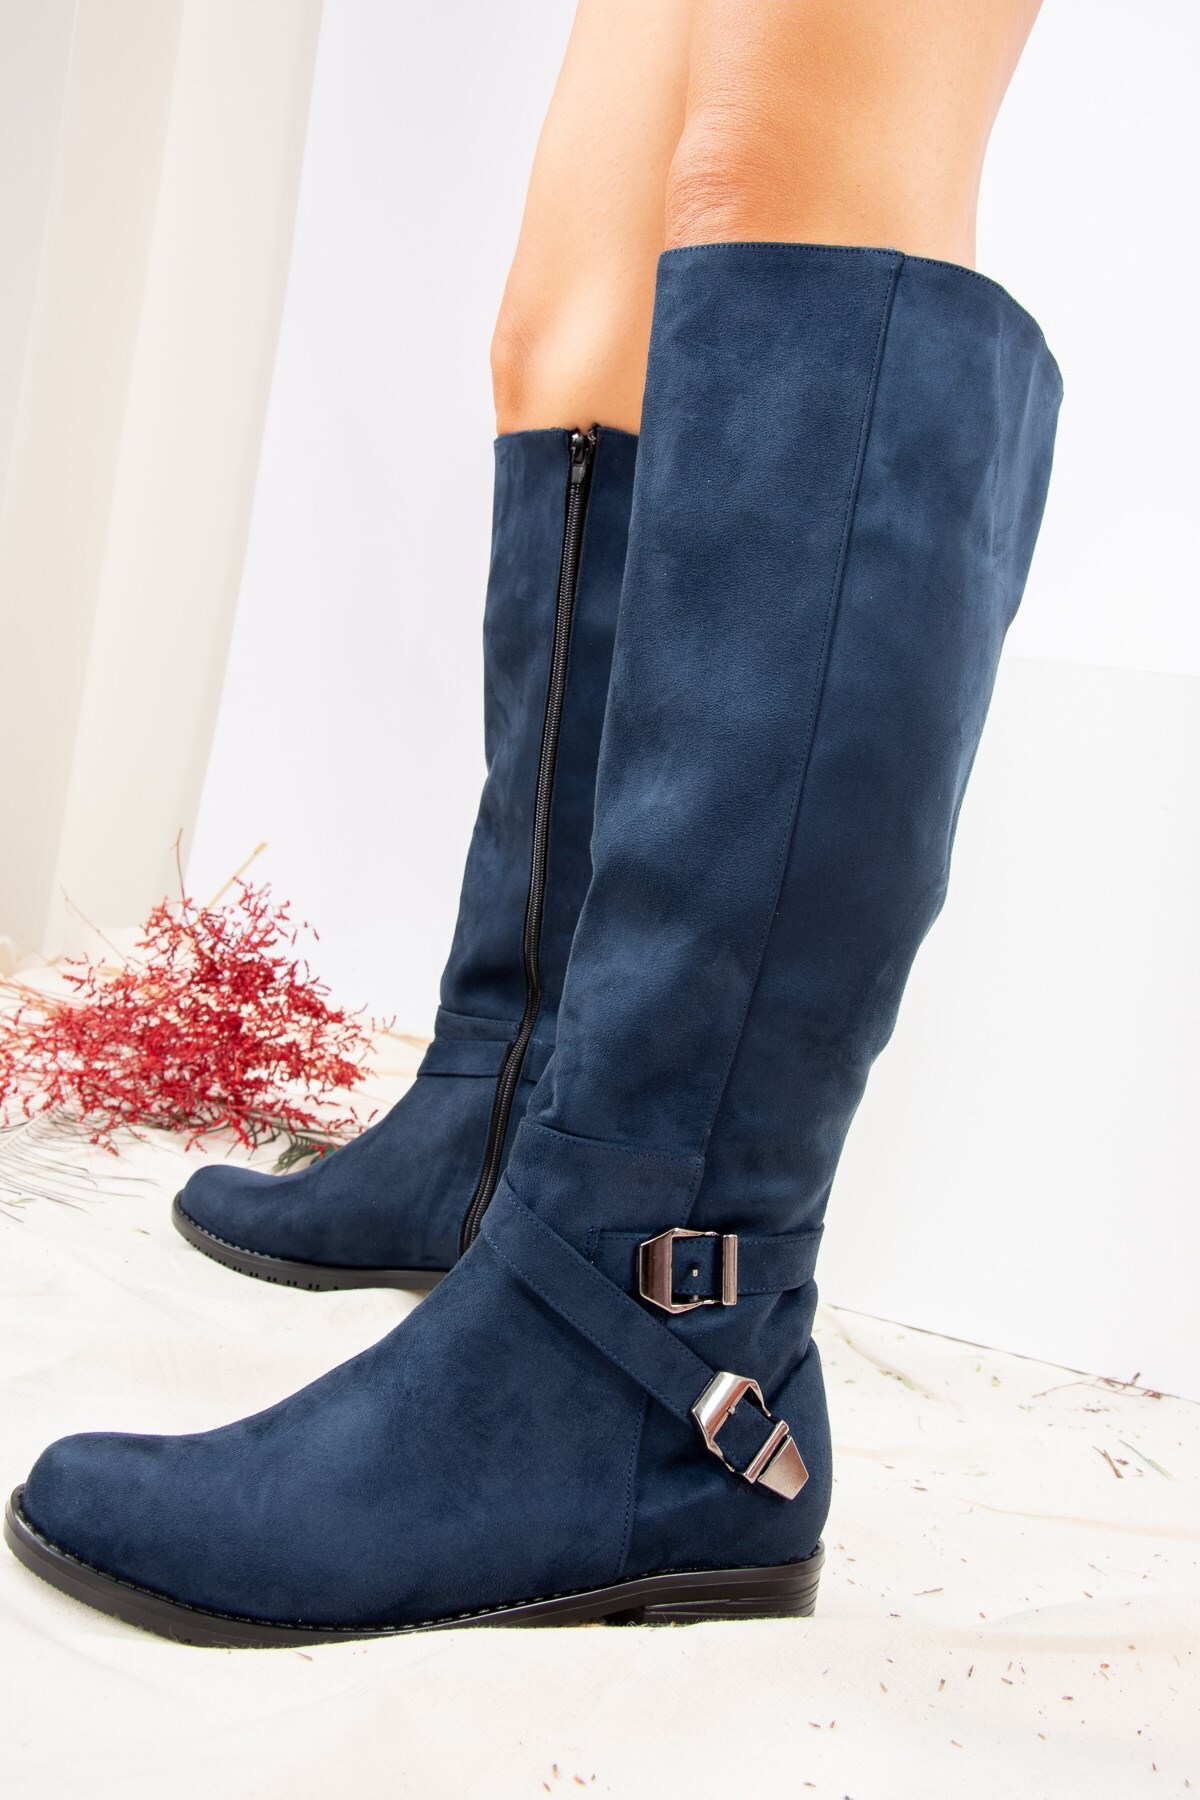 Fox Shoes Navy Blue Women's Suede Boots